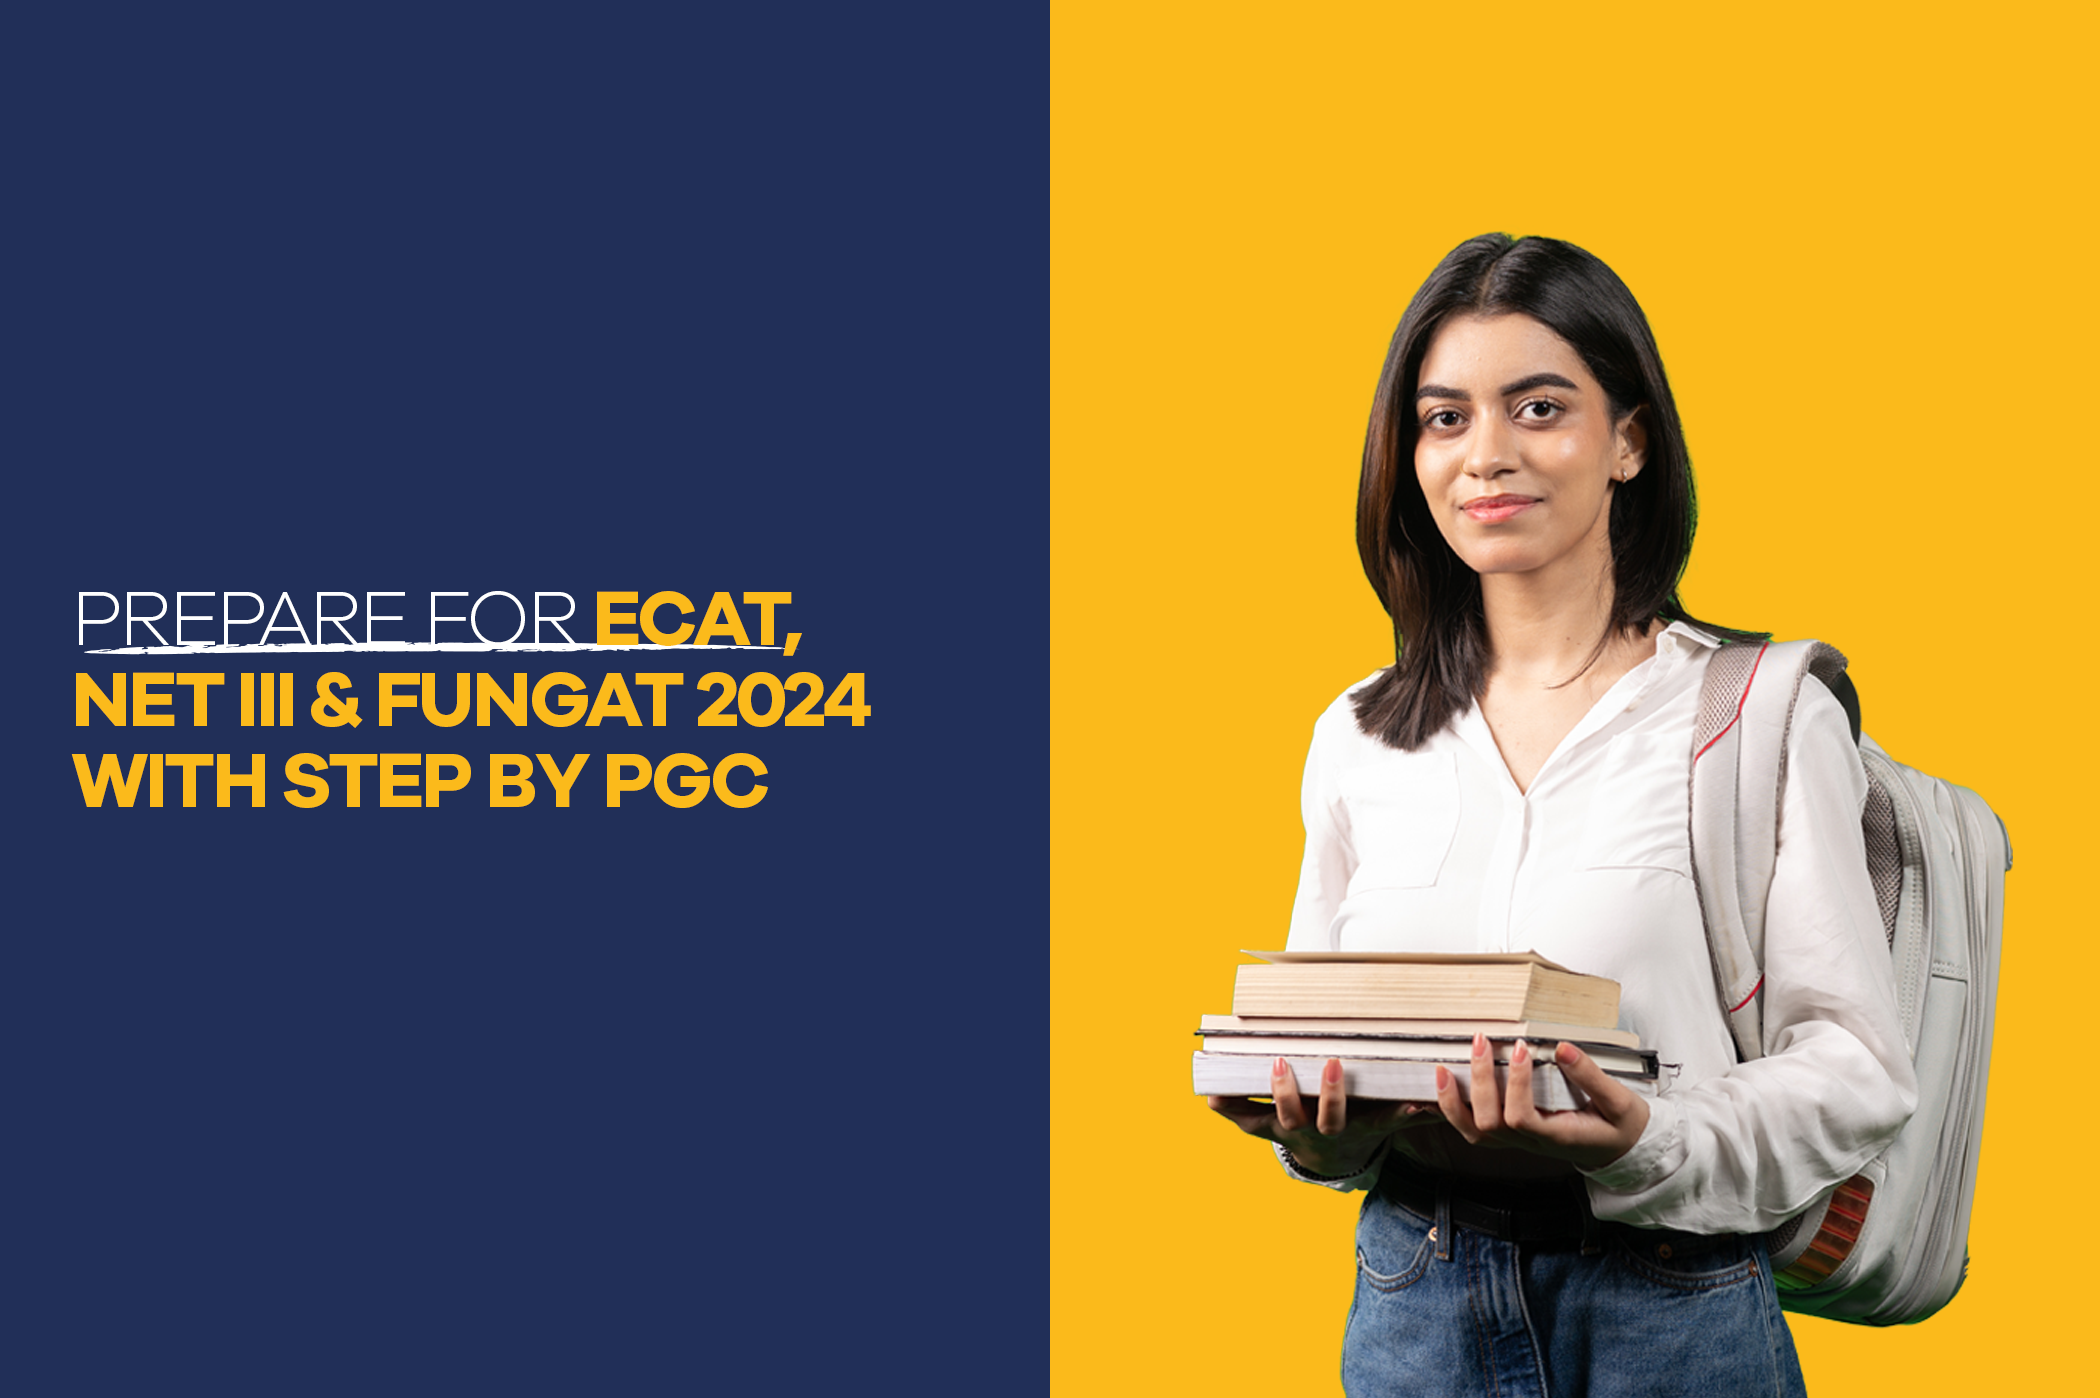 Prepare for ECAT, NET III & FUNGAT 2024 with STEP by PGC 